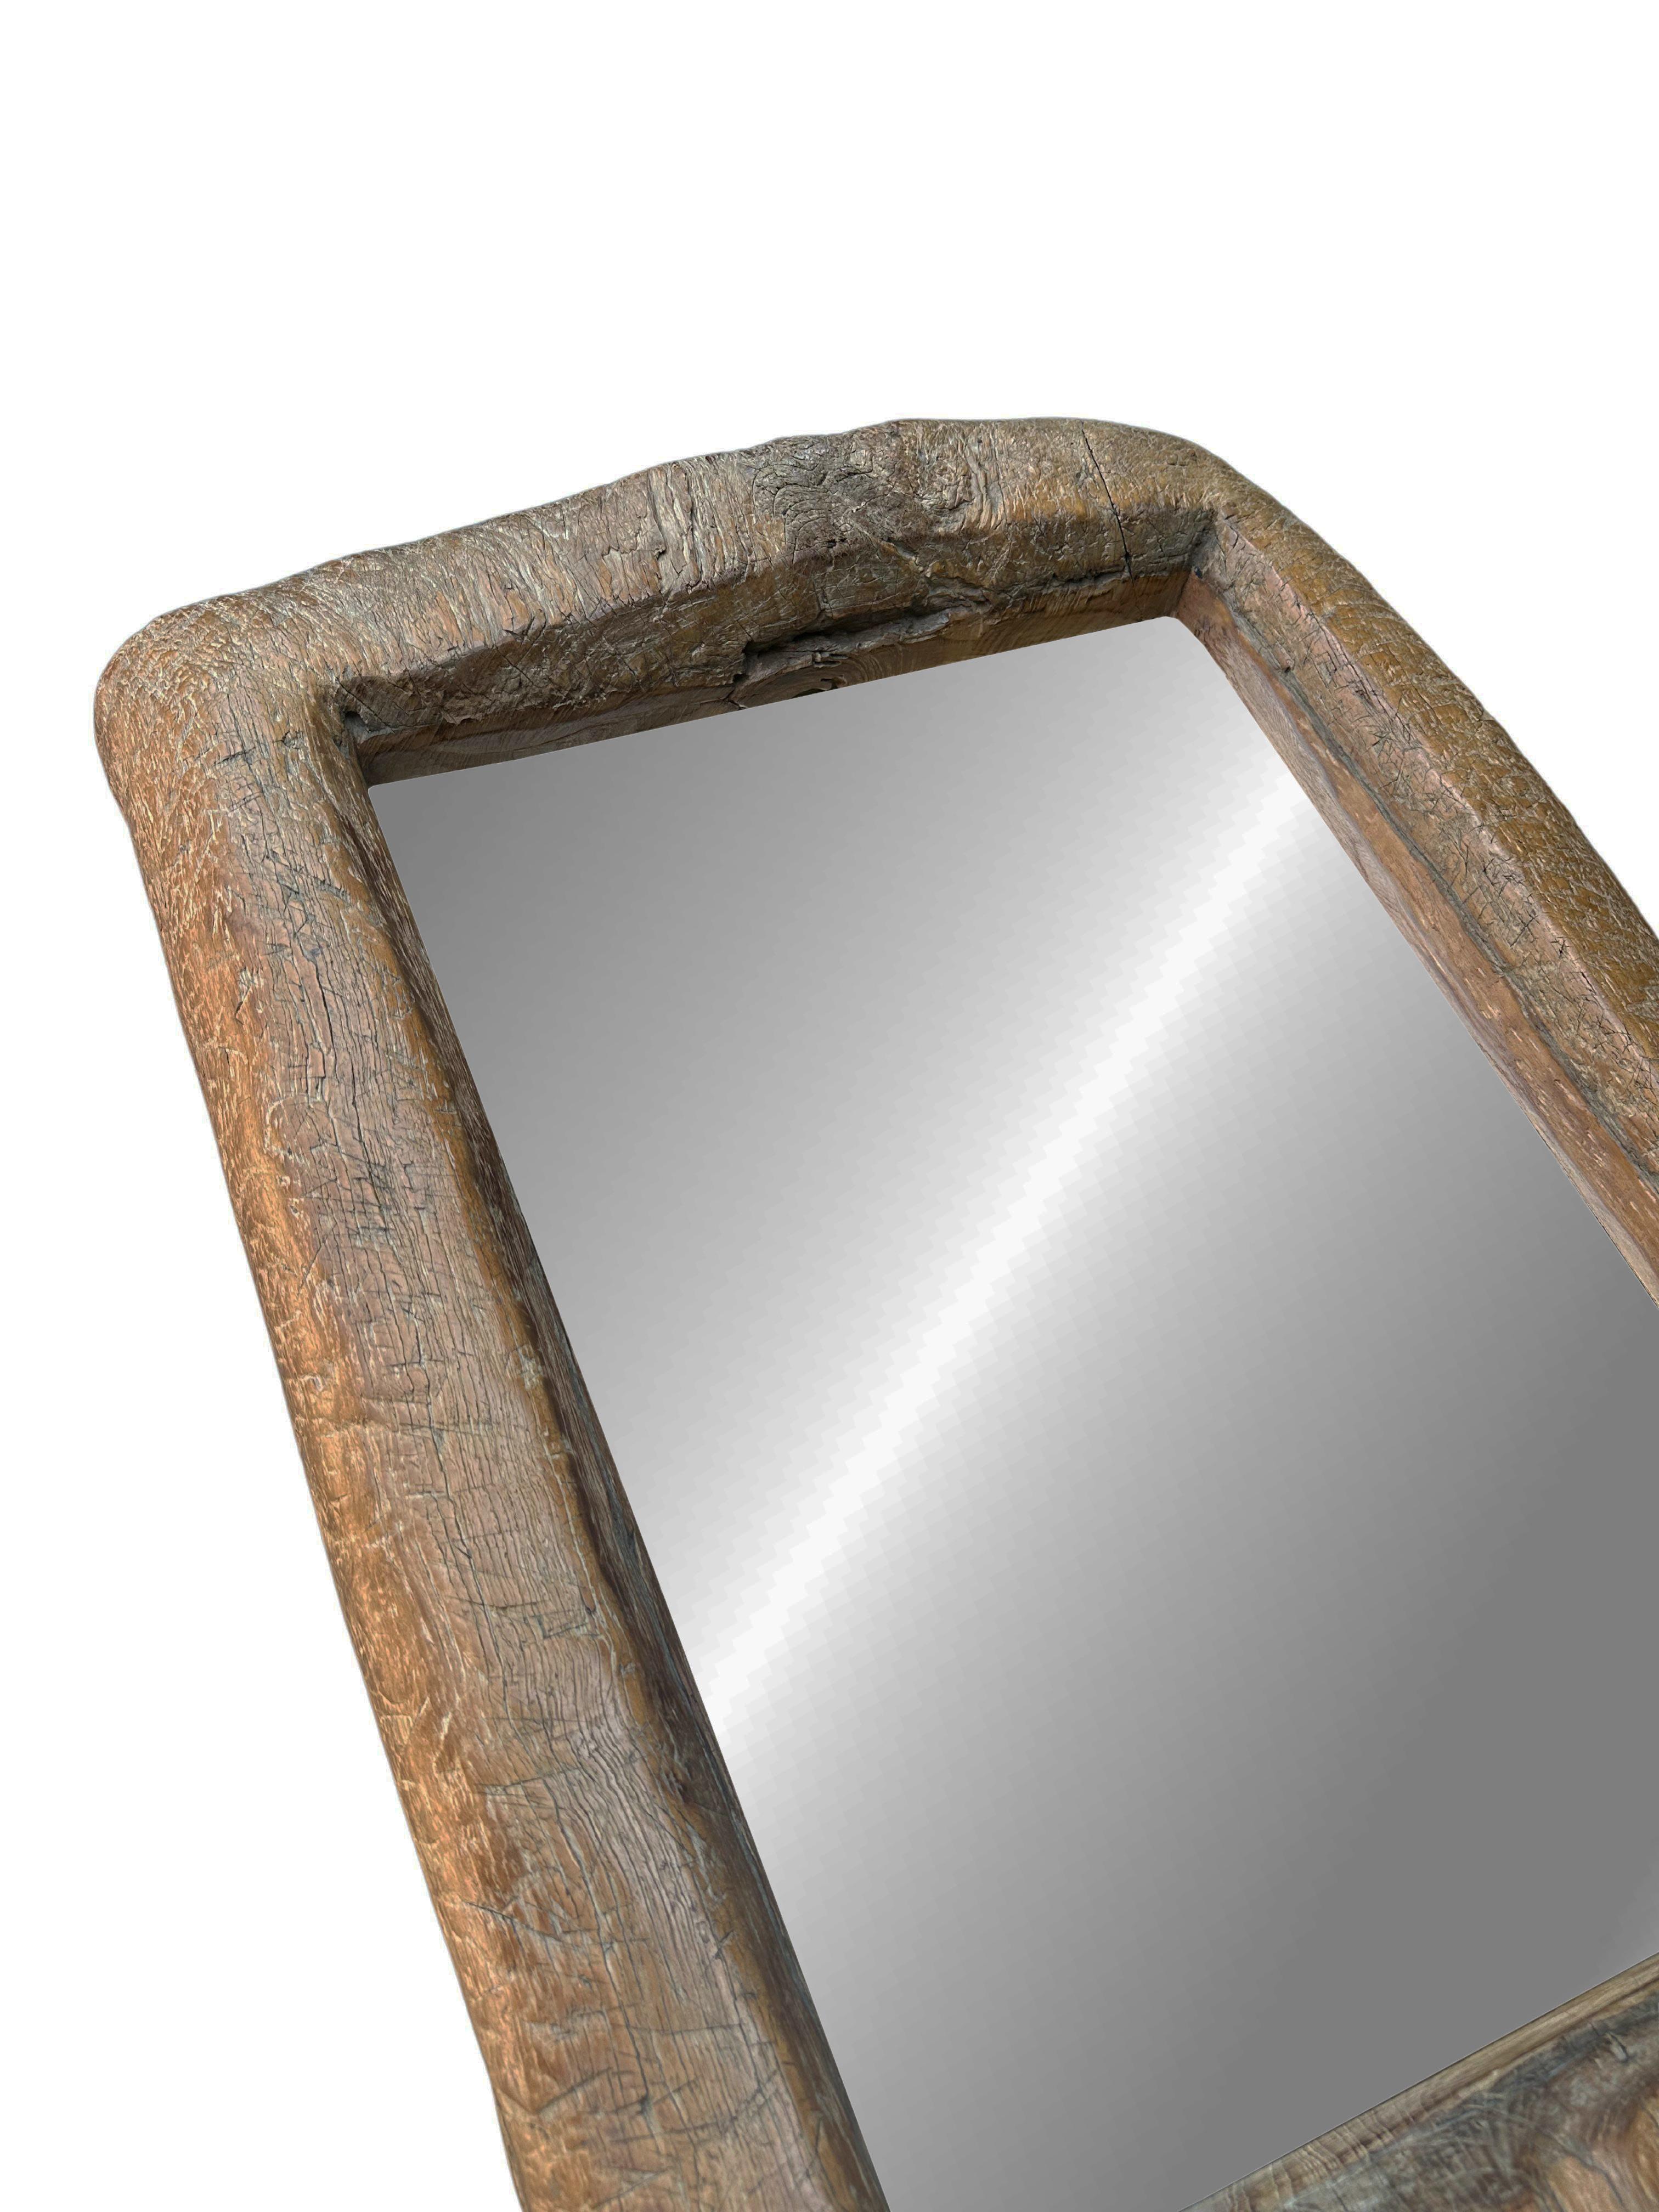 Organic Modern Rustic Teak Wood Mirror With Wonderful Age Related Patina & Markings For Sale